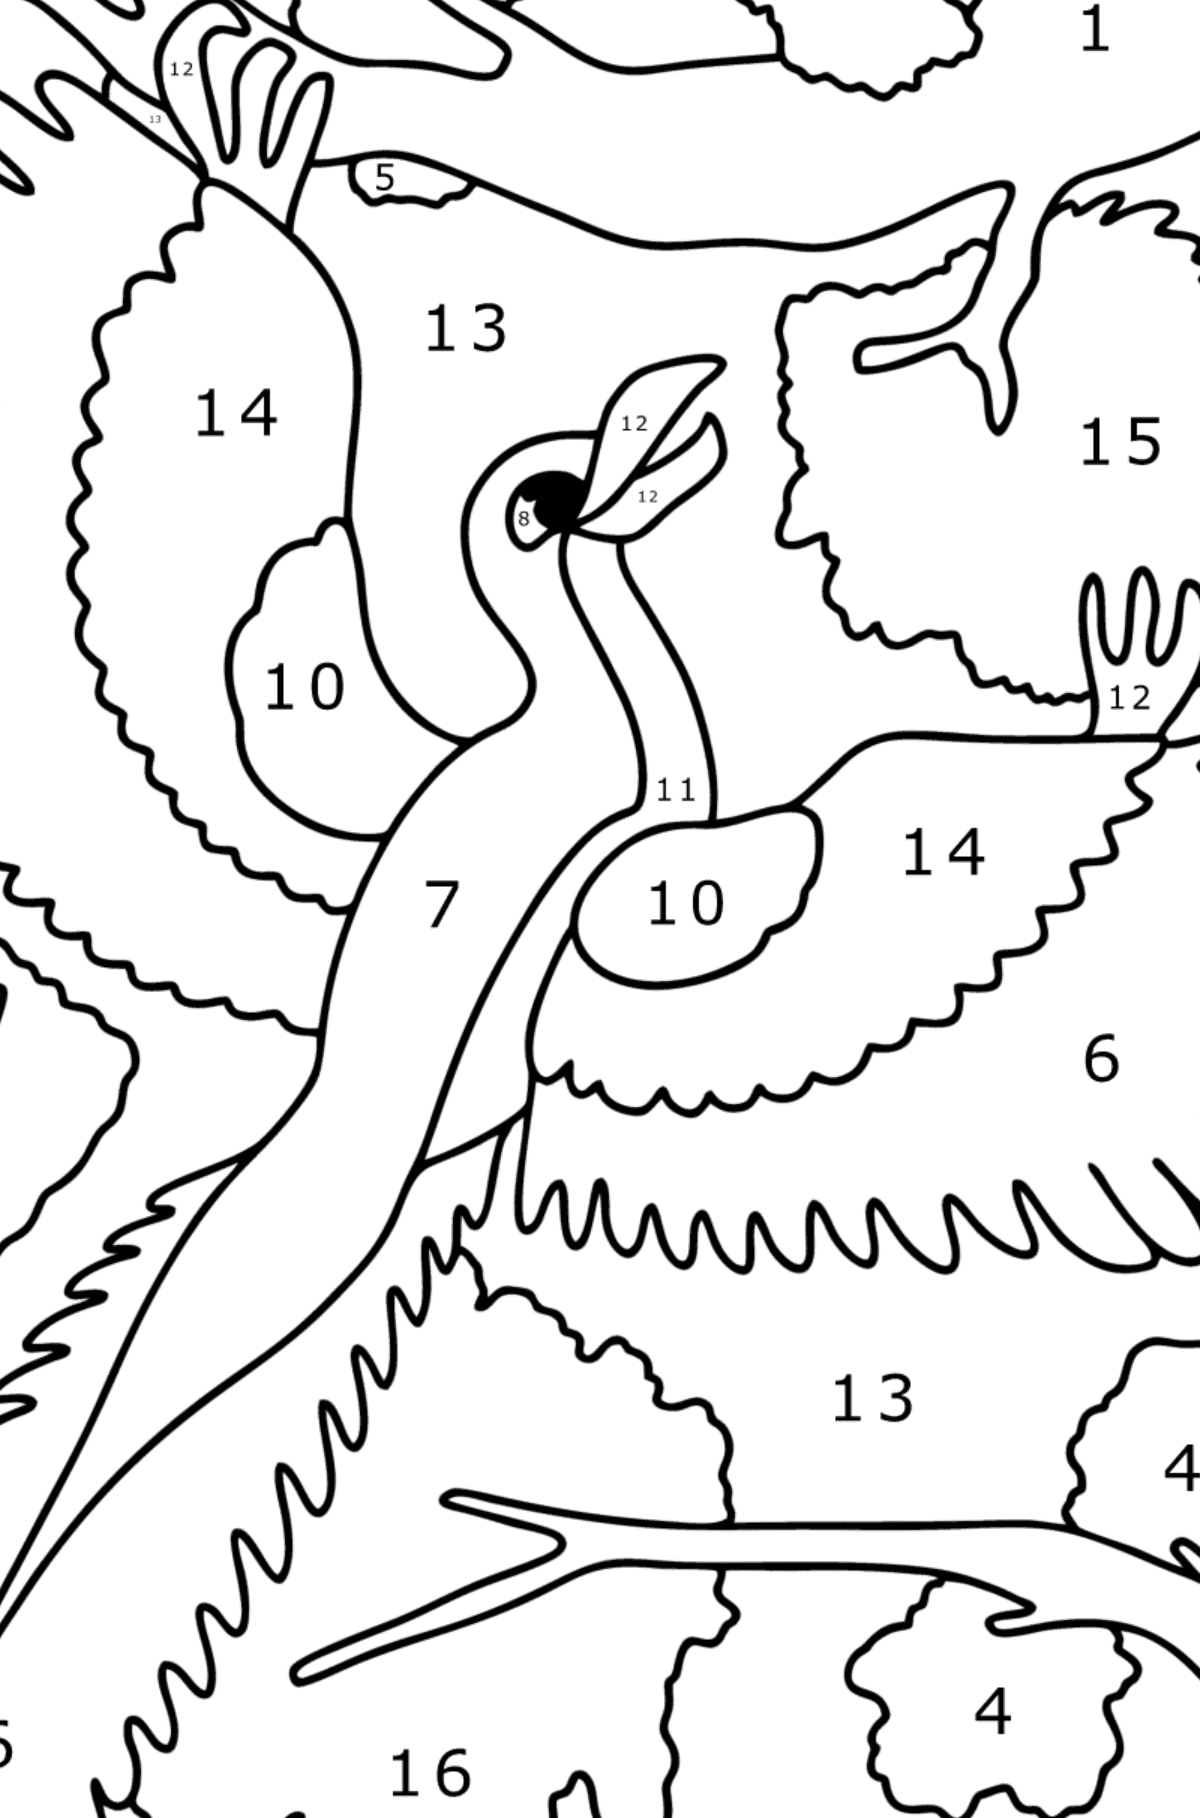 Archeopteryx coloring page - Coloring by Numbers for Kids